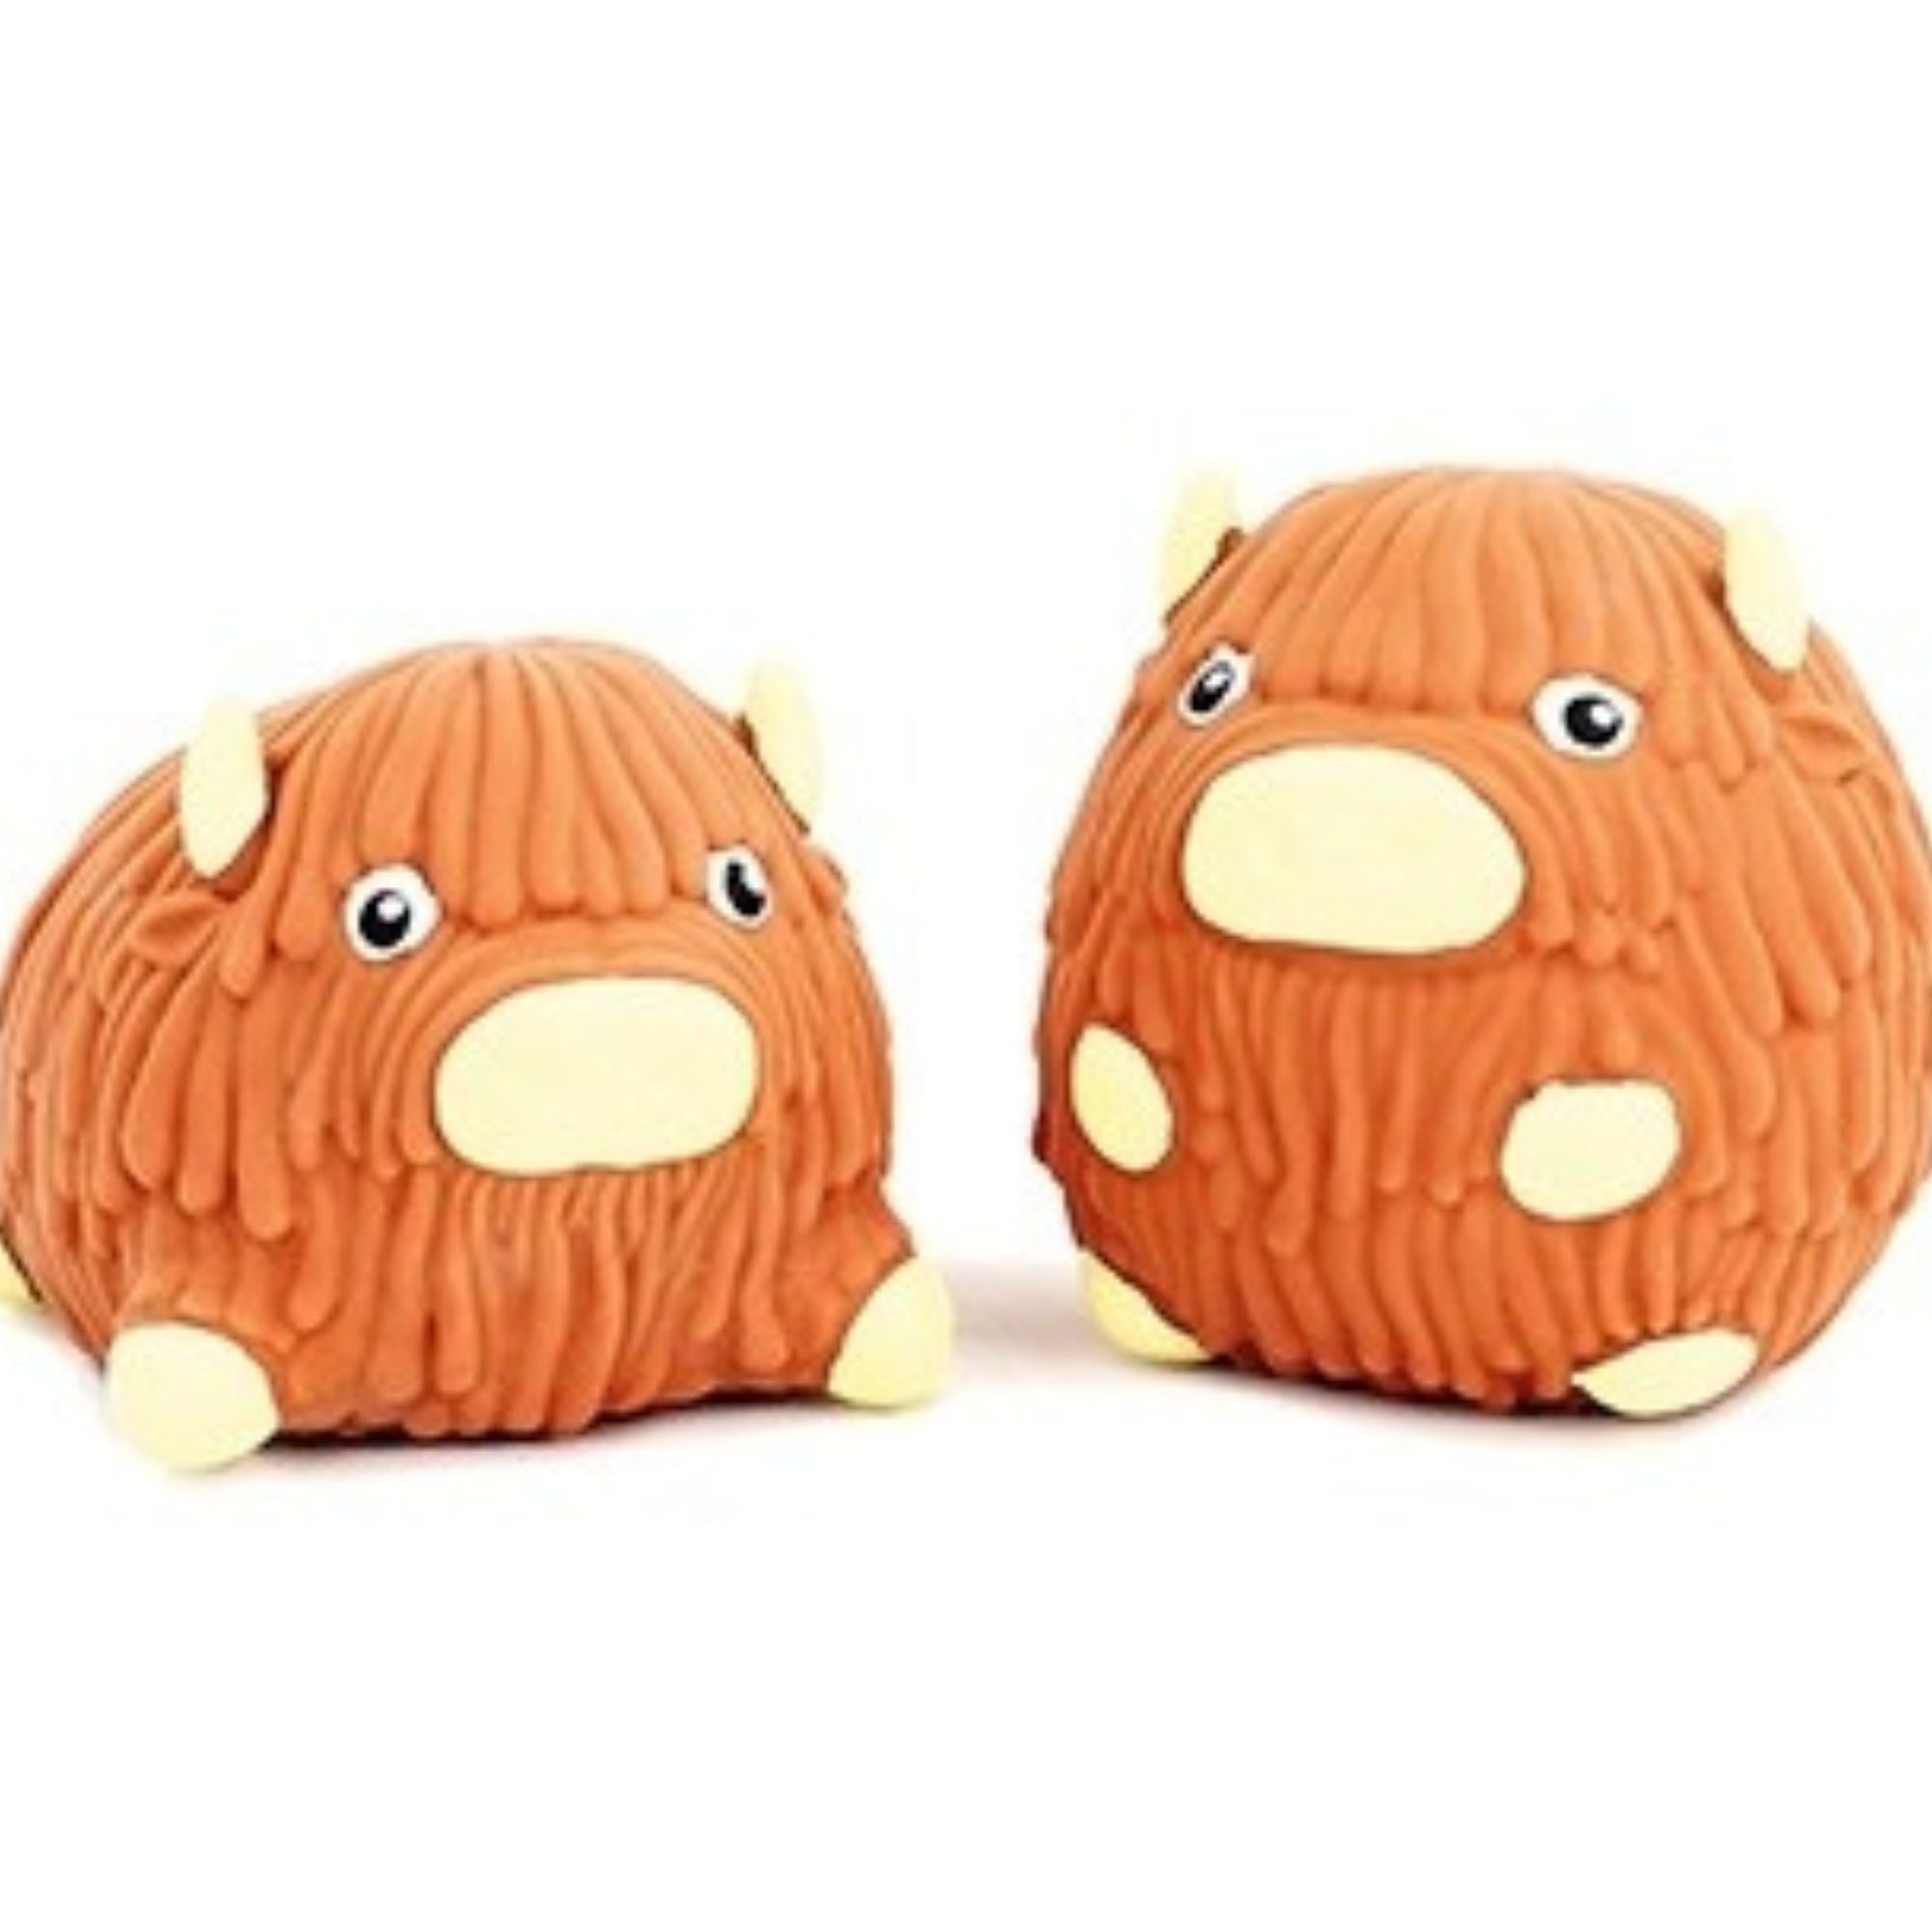 Squidgy Highland Cow, Entertain or De-Stress with this squidgy and adorable Squidgy Highland Cow.Satisfying to squish and made out of a stretchy rubber. The Squidgy Highland Cow is a fantastic stress buster and so tactile to touch,perfect size to put in a pocket and carry around and great in a classroom. Squidgy Highland Cow Squidgy Highland Cow stress toy Perfect to squeeze all your stress away Farm animal recreation Highland Cow Height 9cm, Length 8.5cm, Width 8.5cm approx Suitable for ages 3+, Squidgy Hi